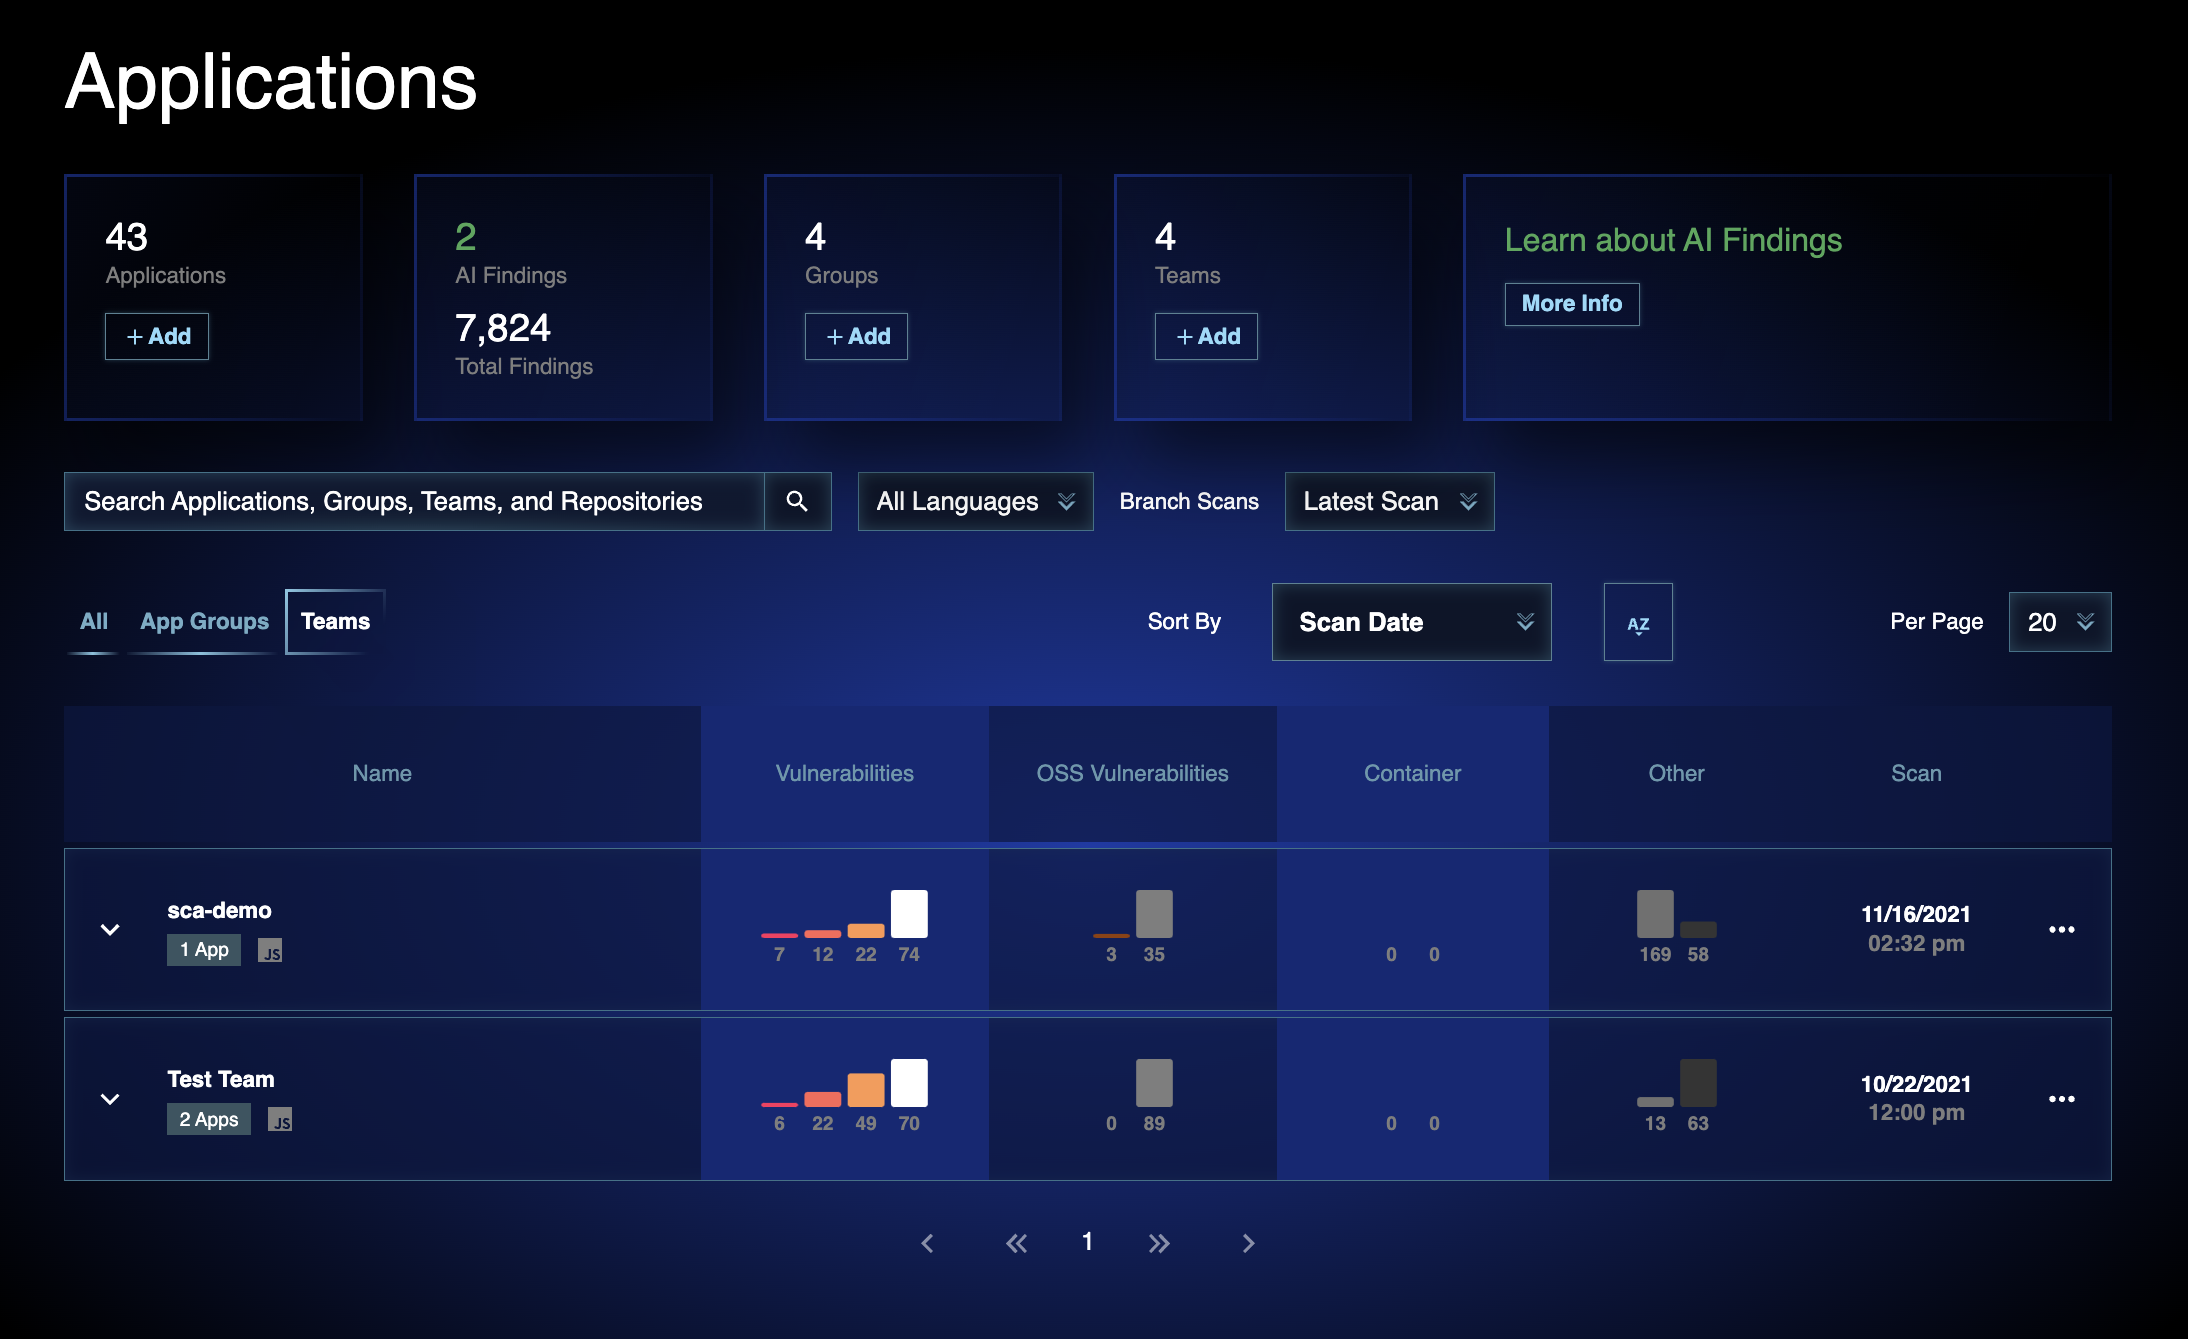 A view of two teams in the dashboard